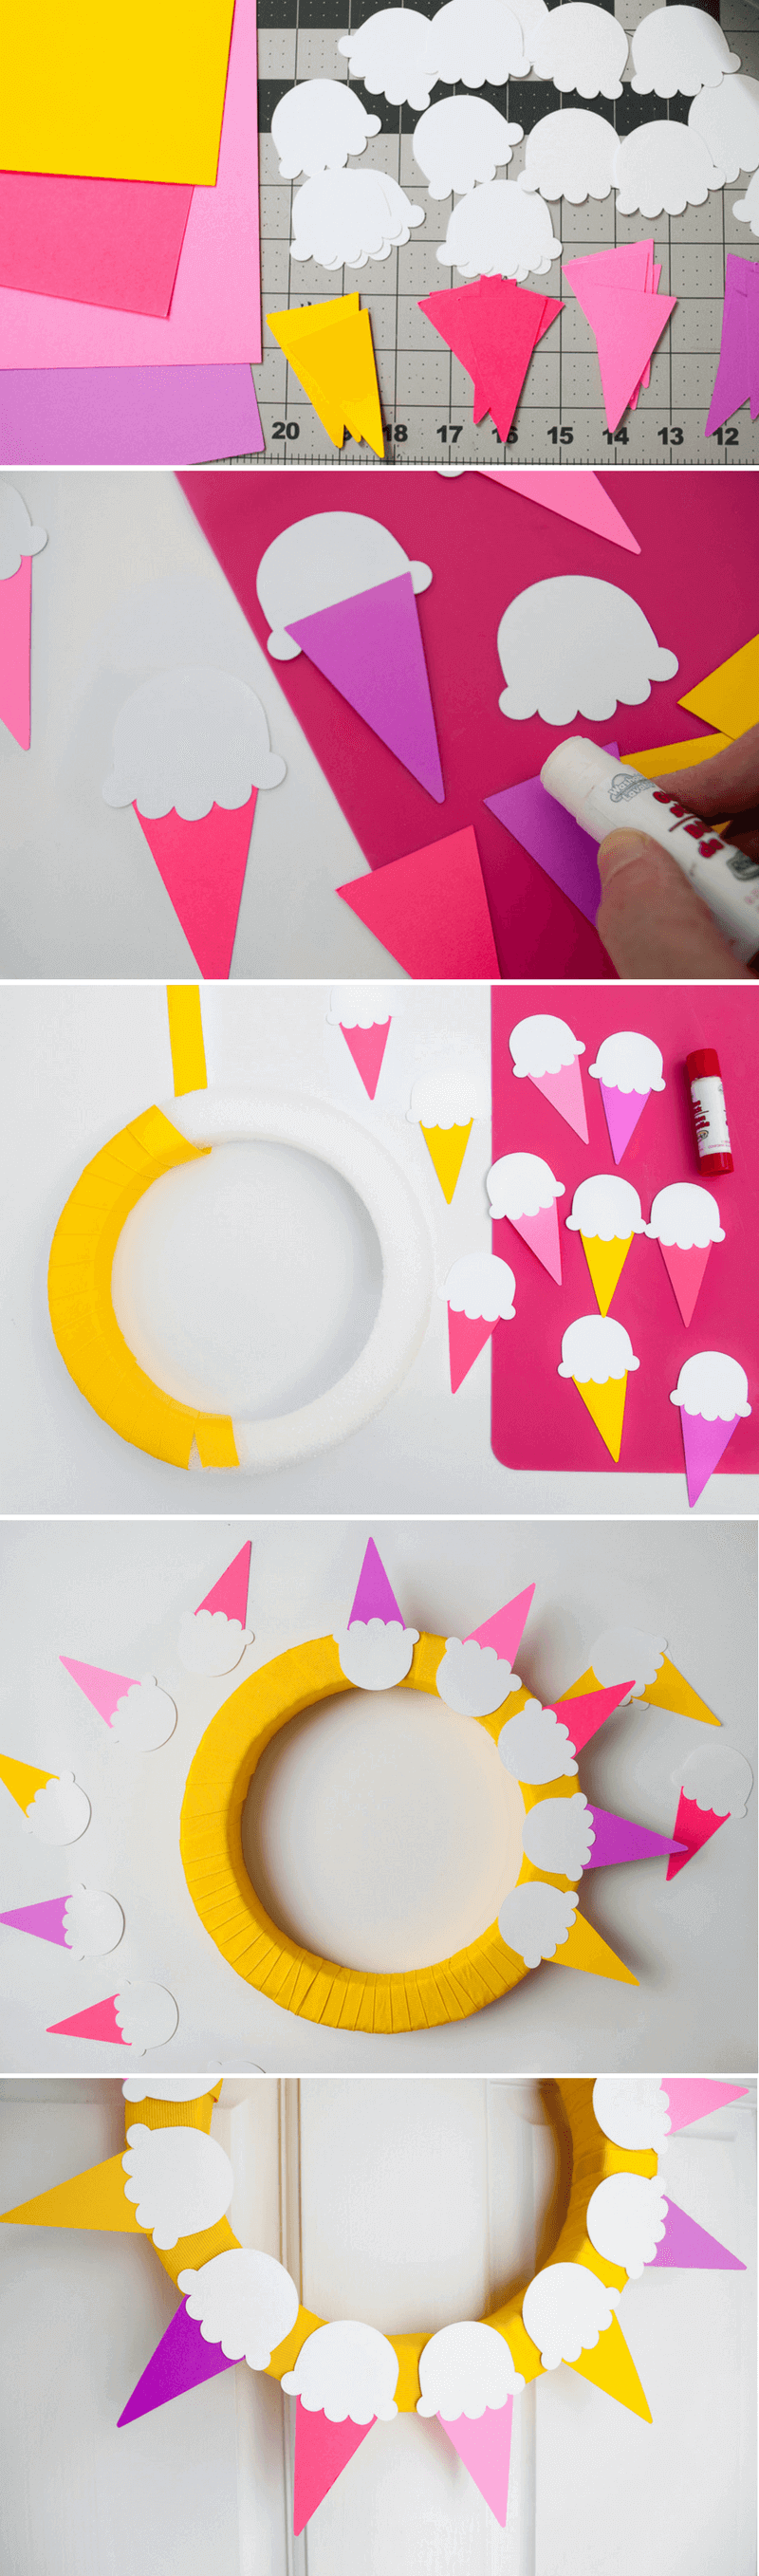 How to make an ice cream front door wreath for summer. Make this cool ice cream wreath that looks like sunshine!